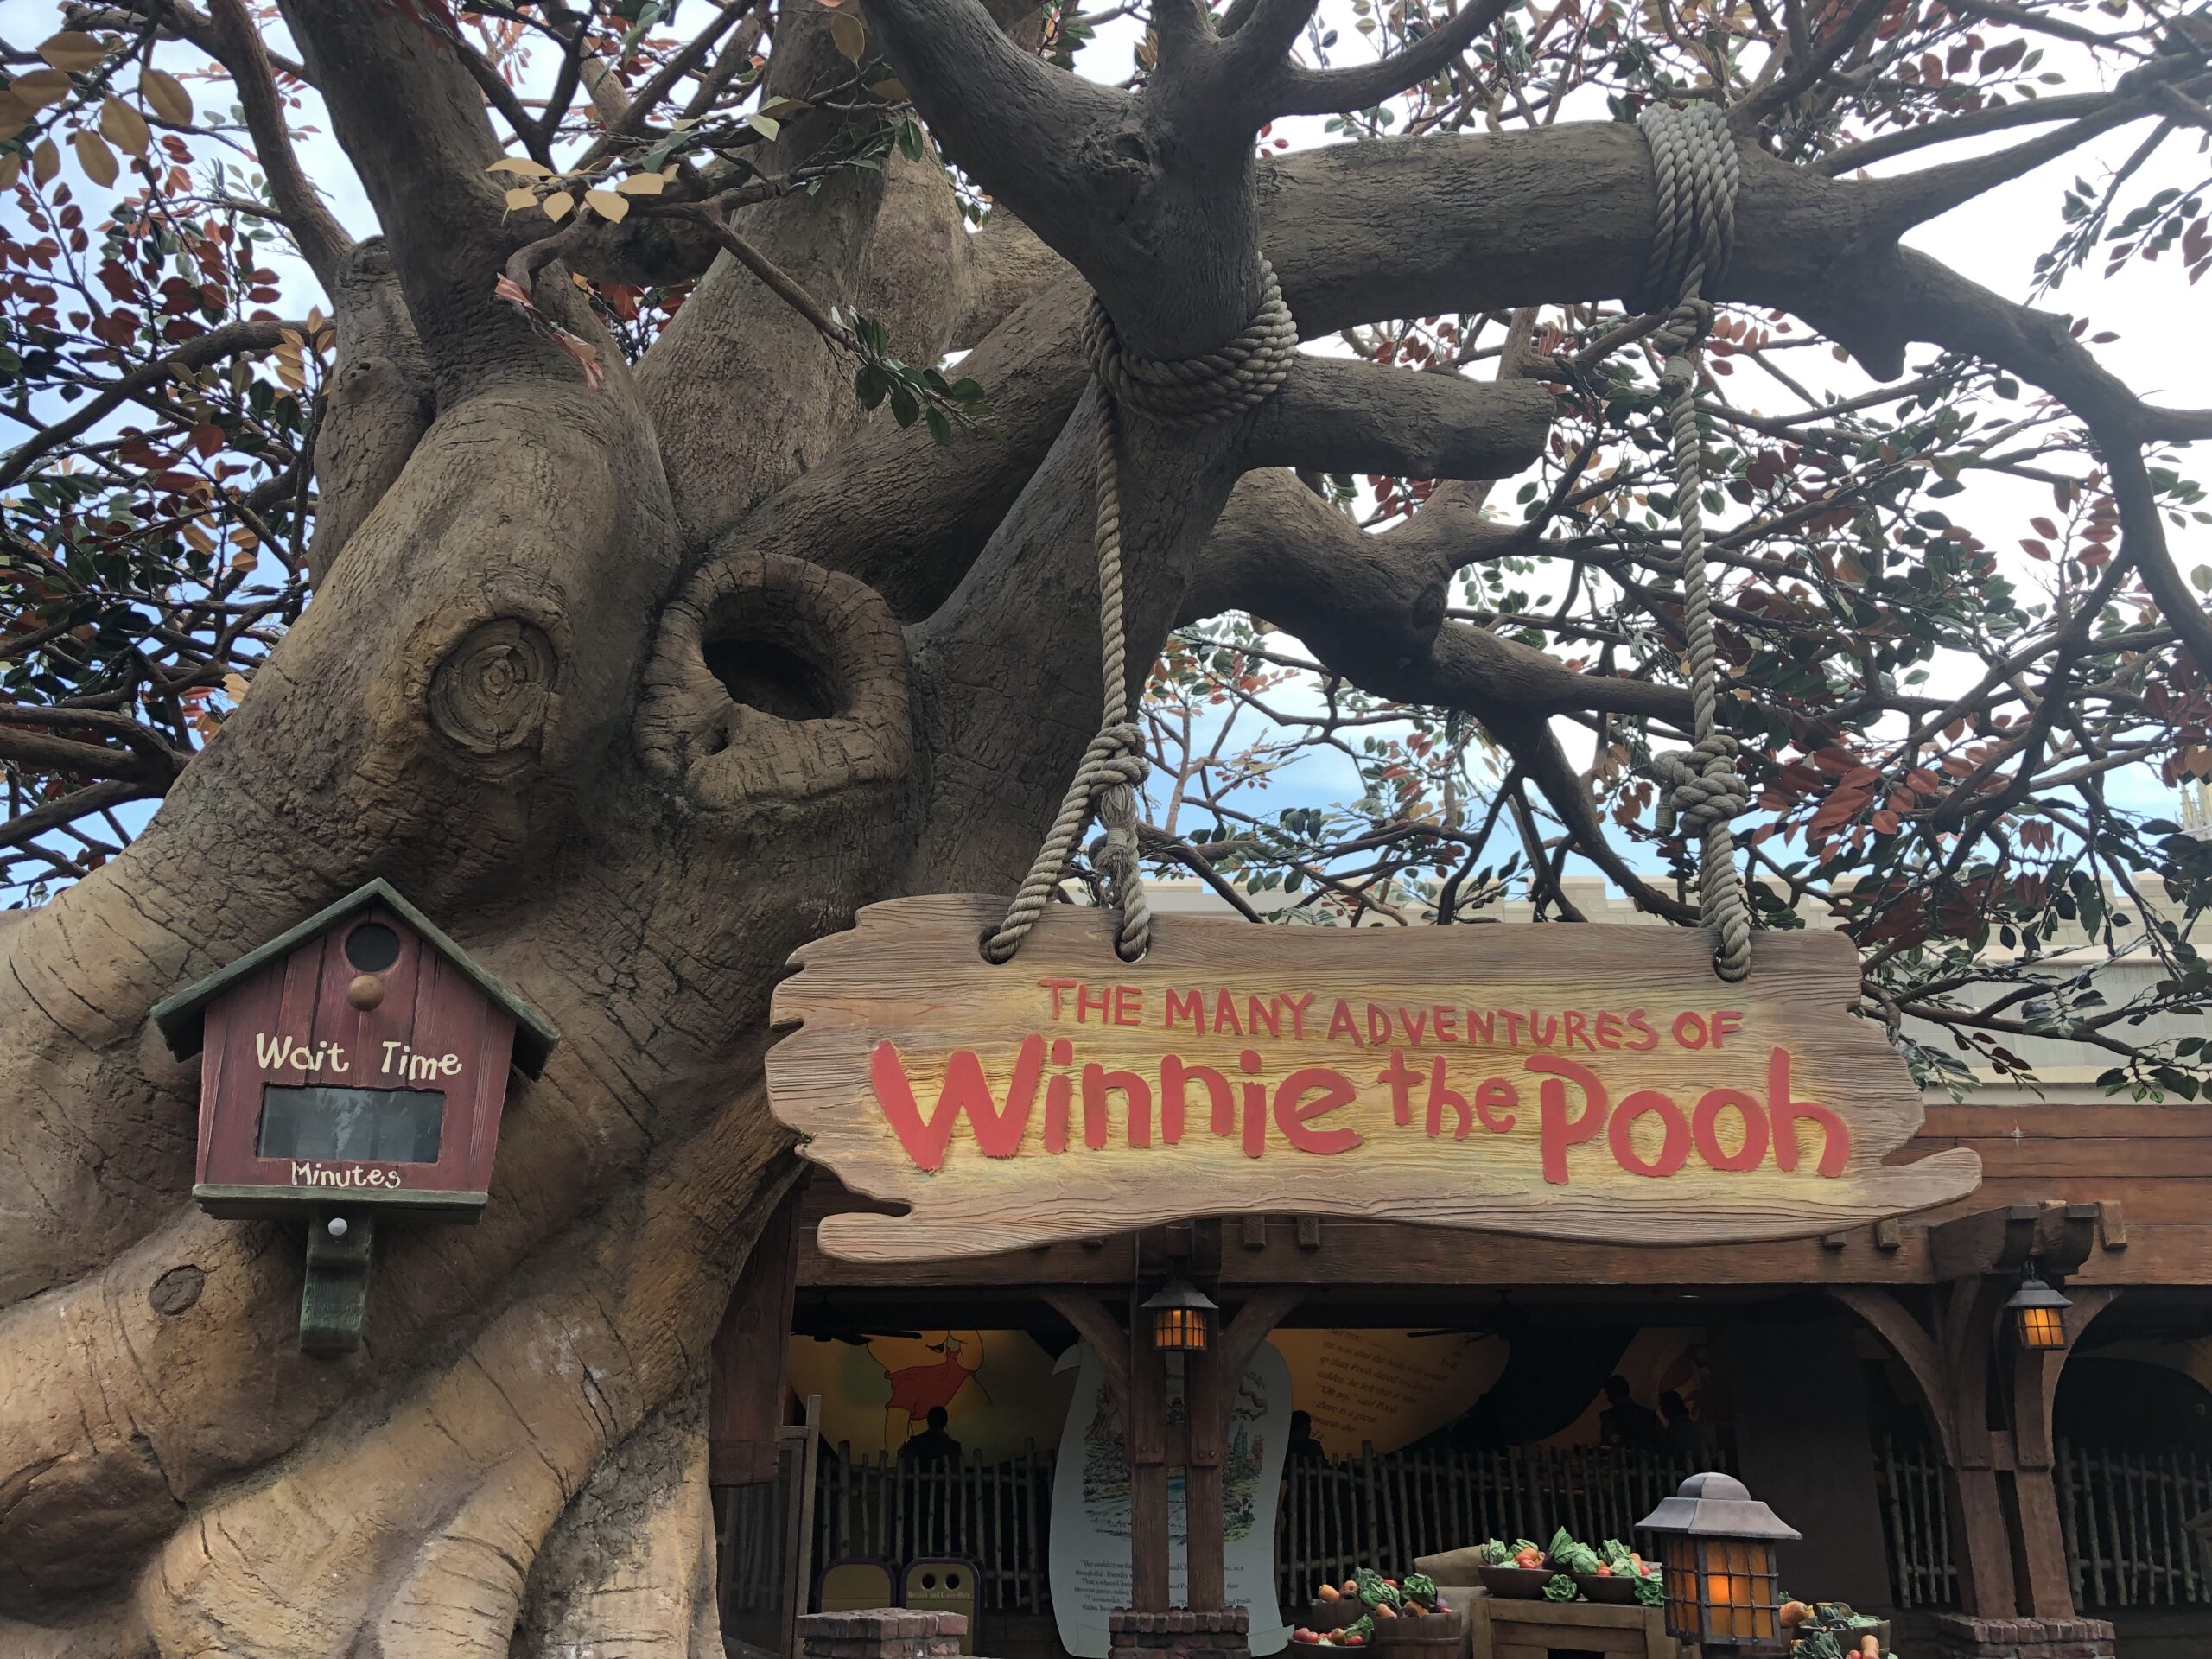 Waiting in the Hundred Acre Wood